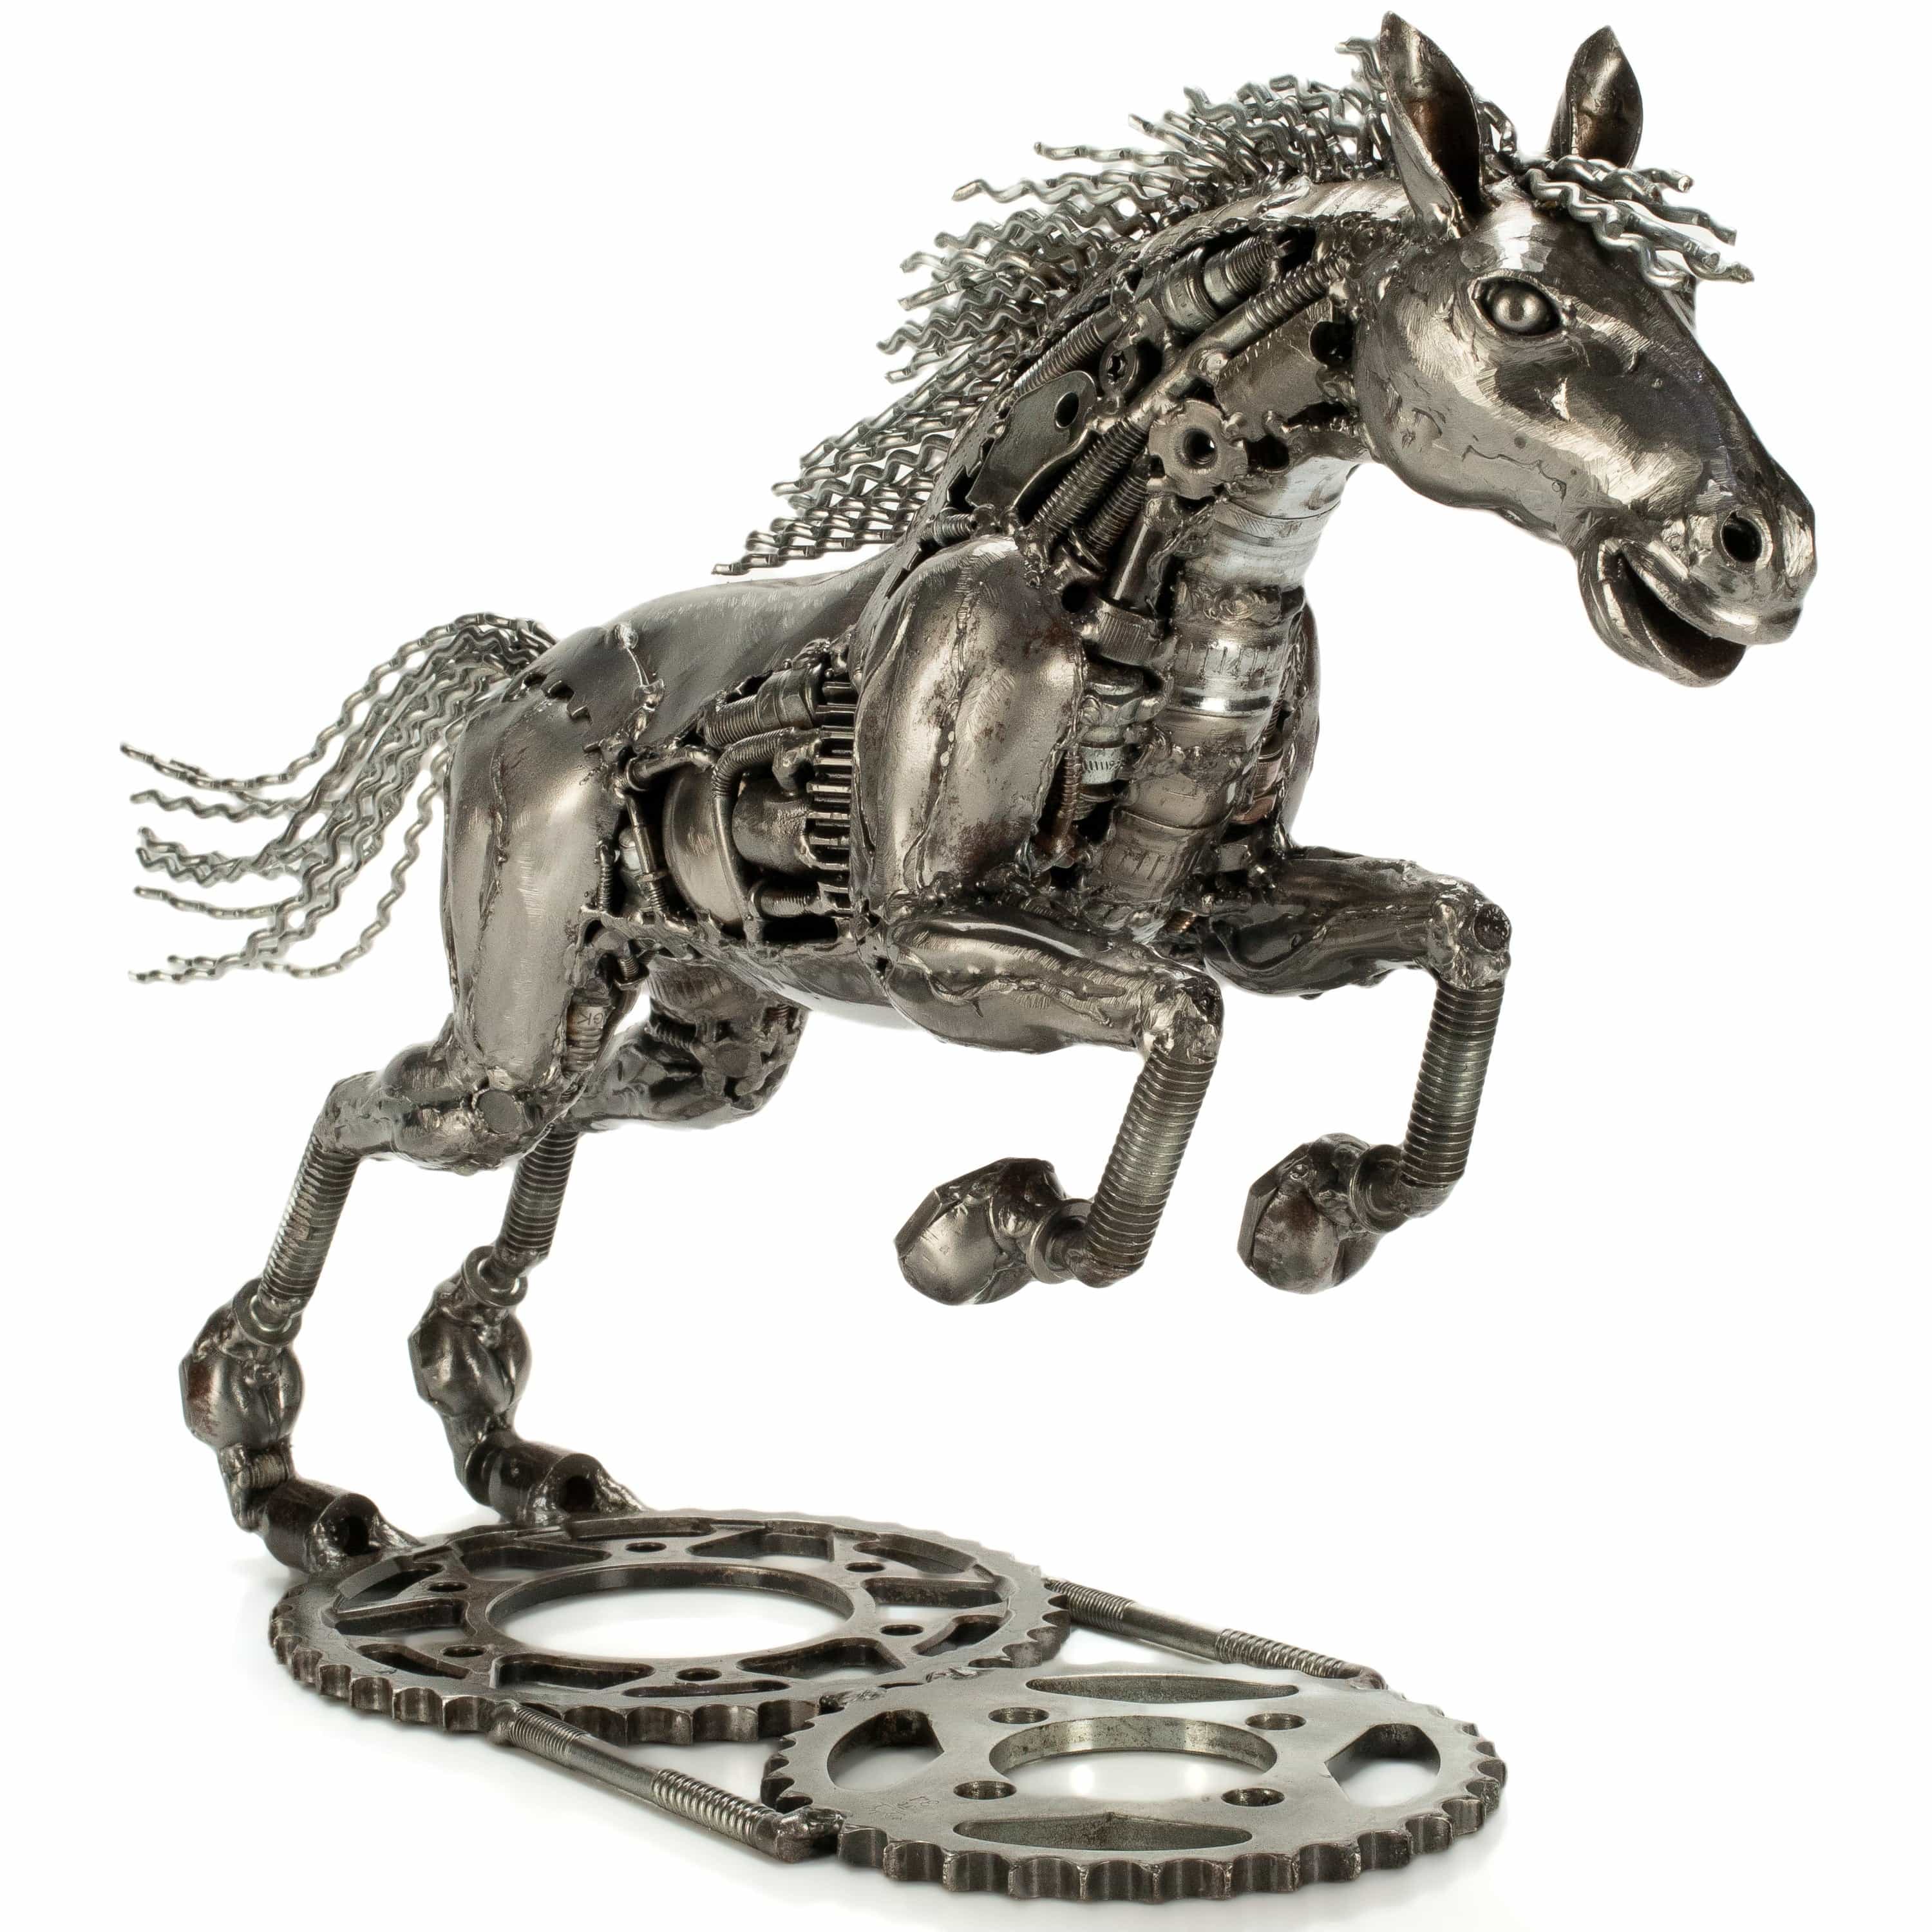 KALIFANO Recycled Metal Art Jumping Horse Inspired Recycled Metal Art Sculpture RMS-3000JHS-PK